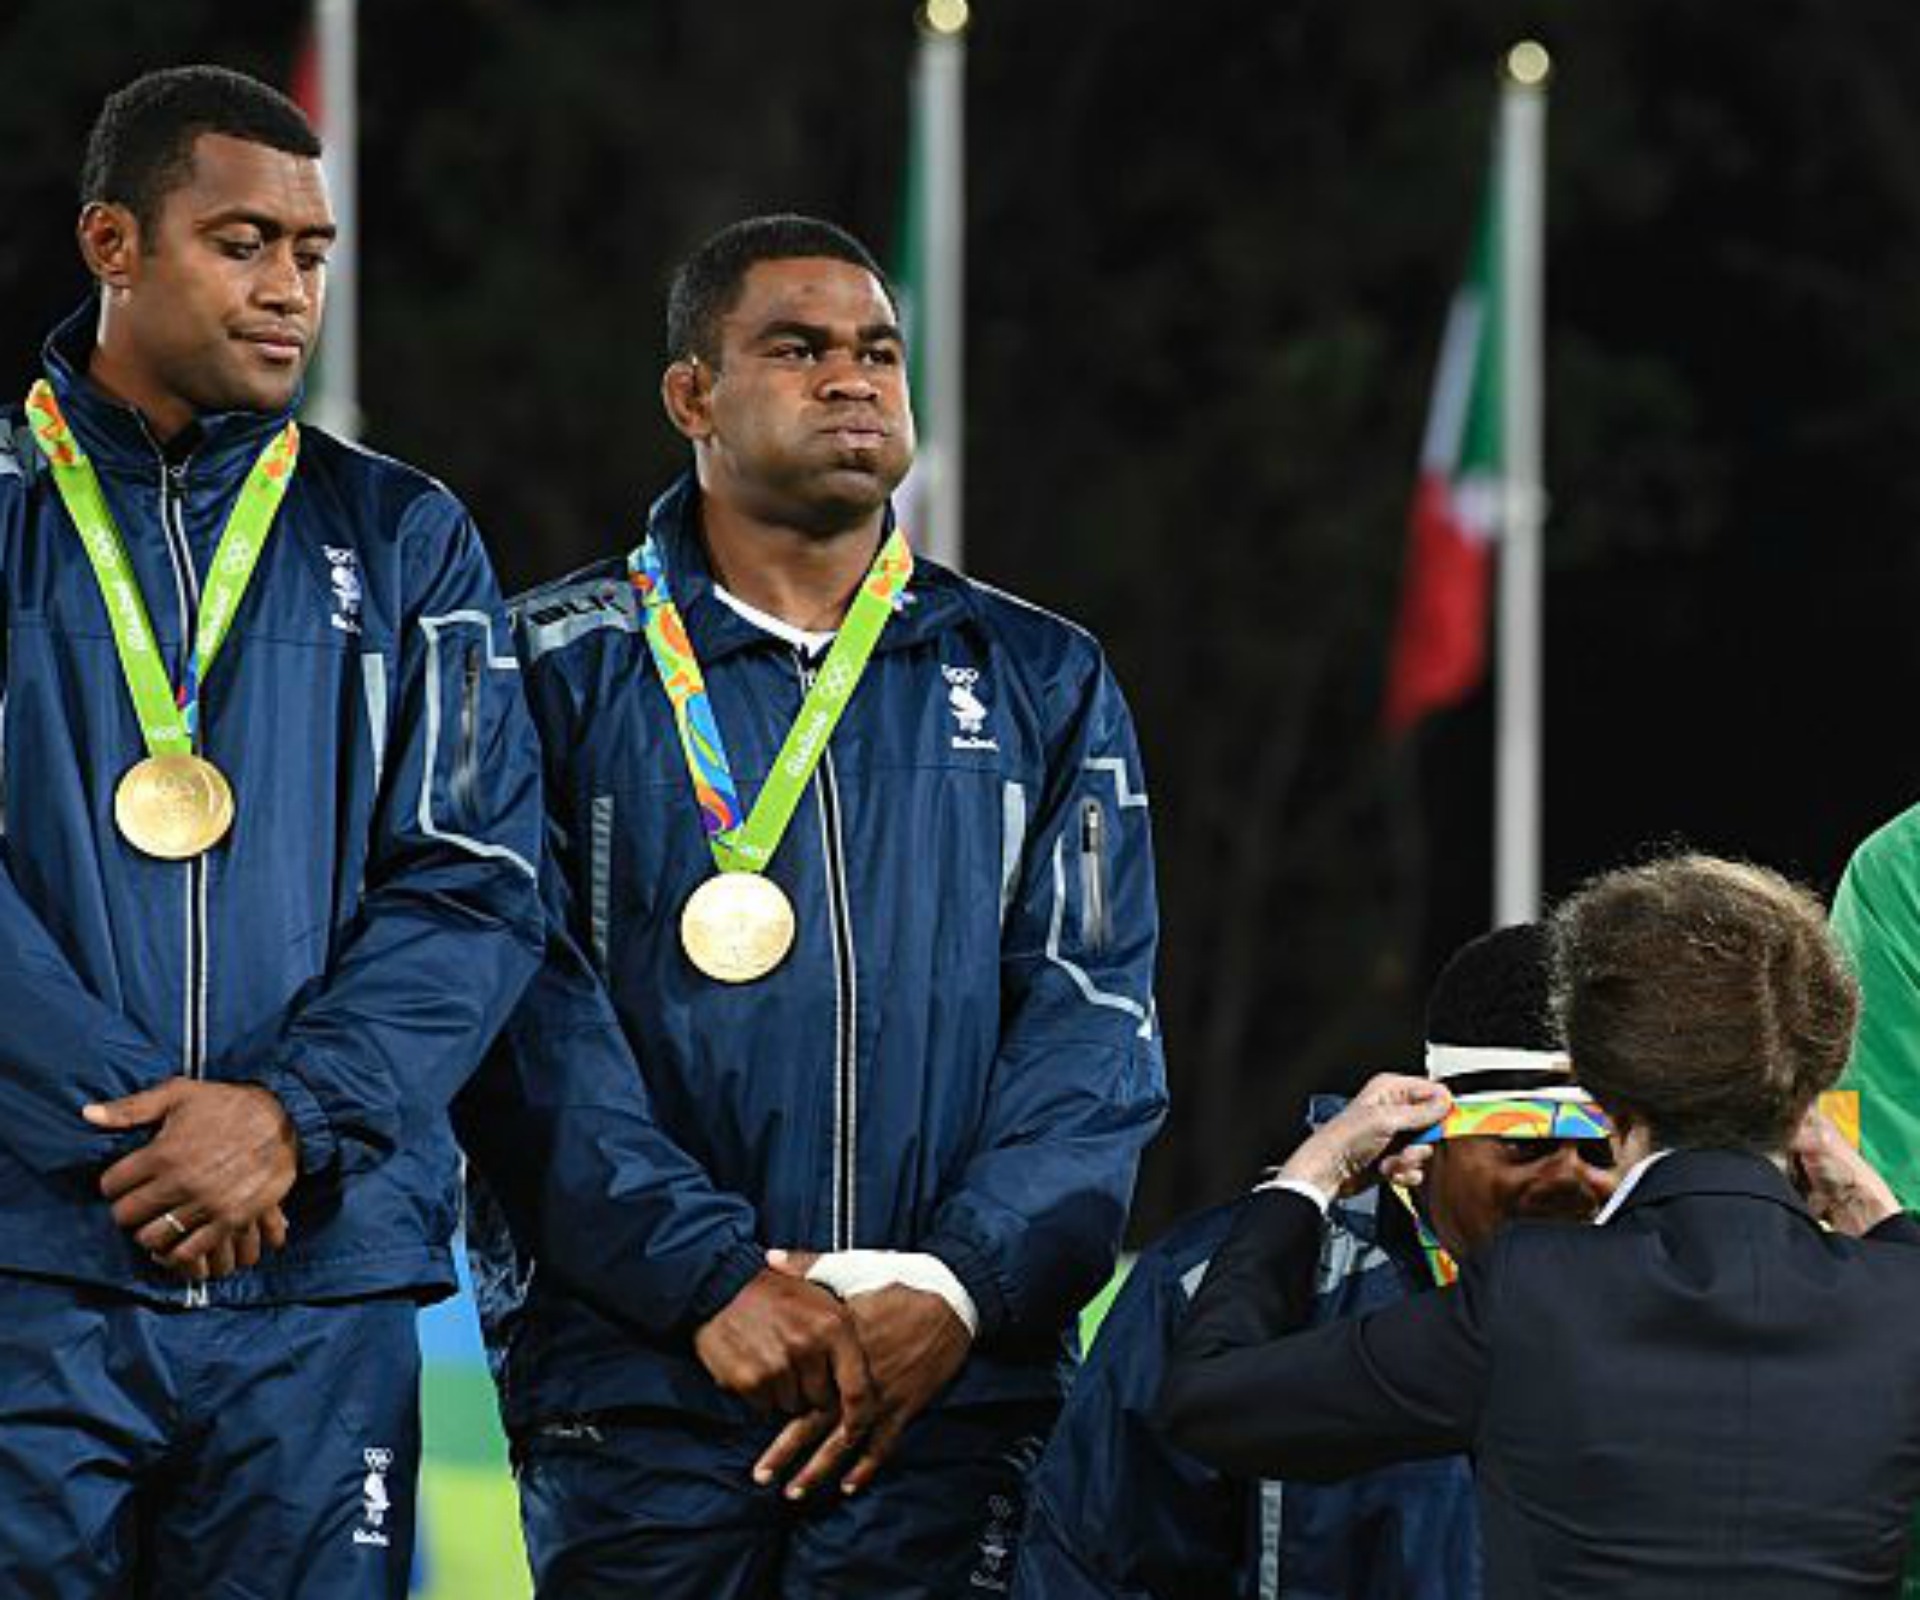 Fiji wins its first Olympic medal and it’s GOLD